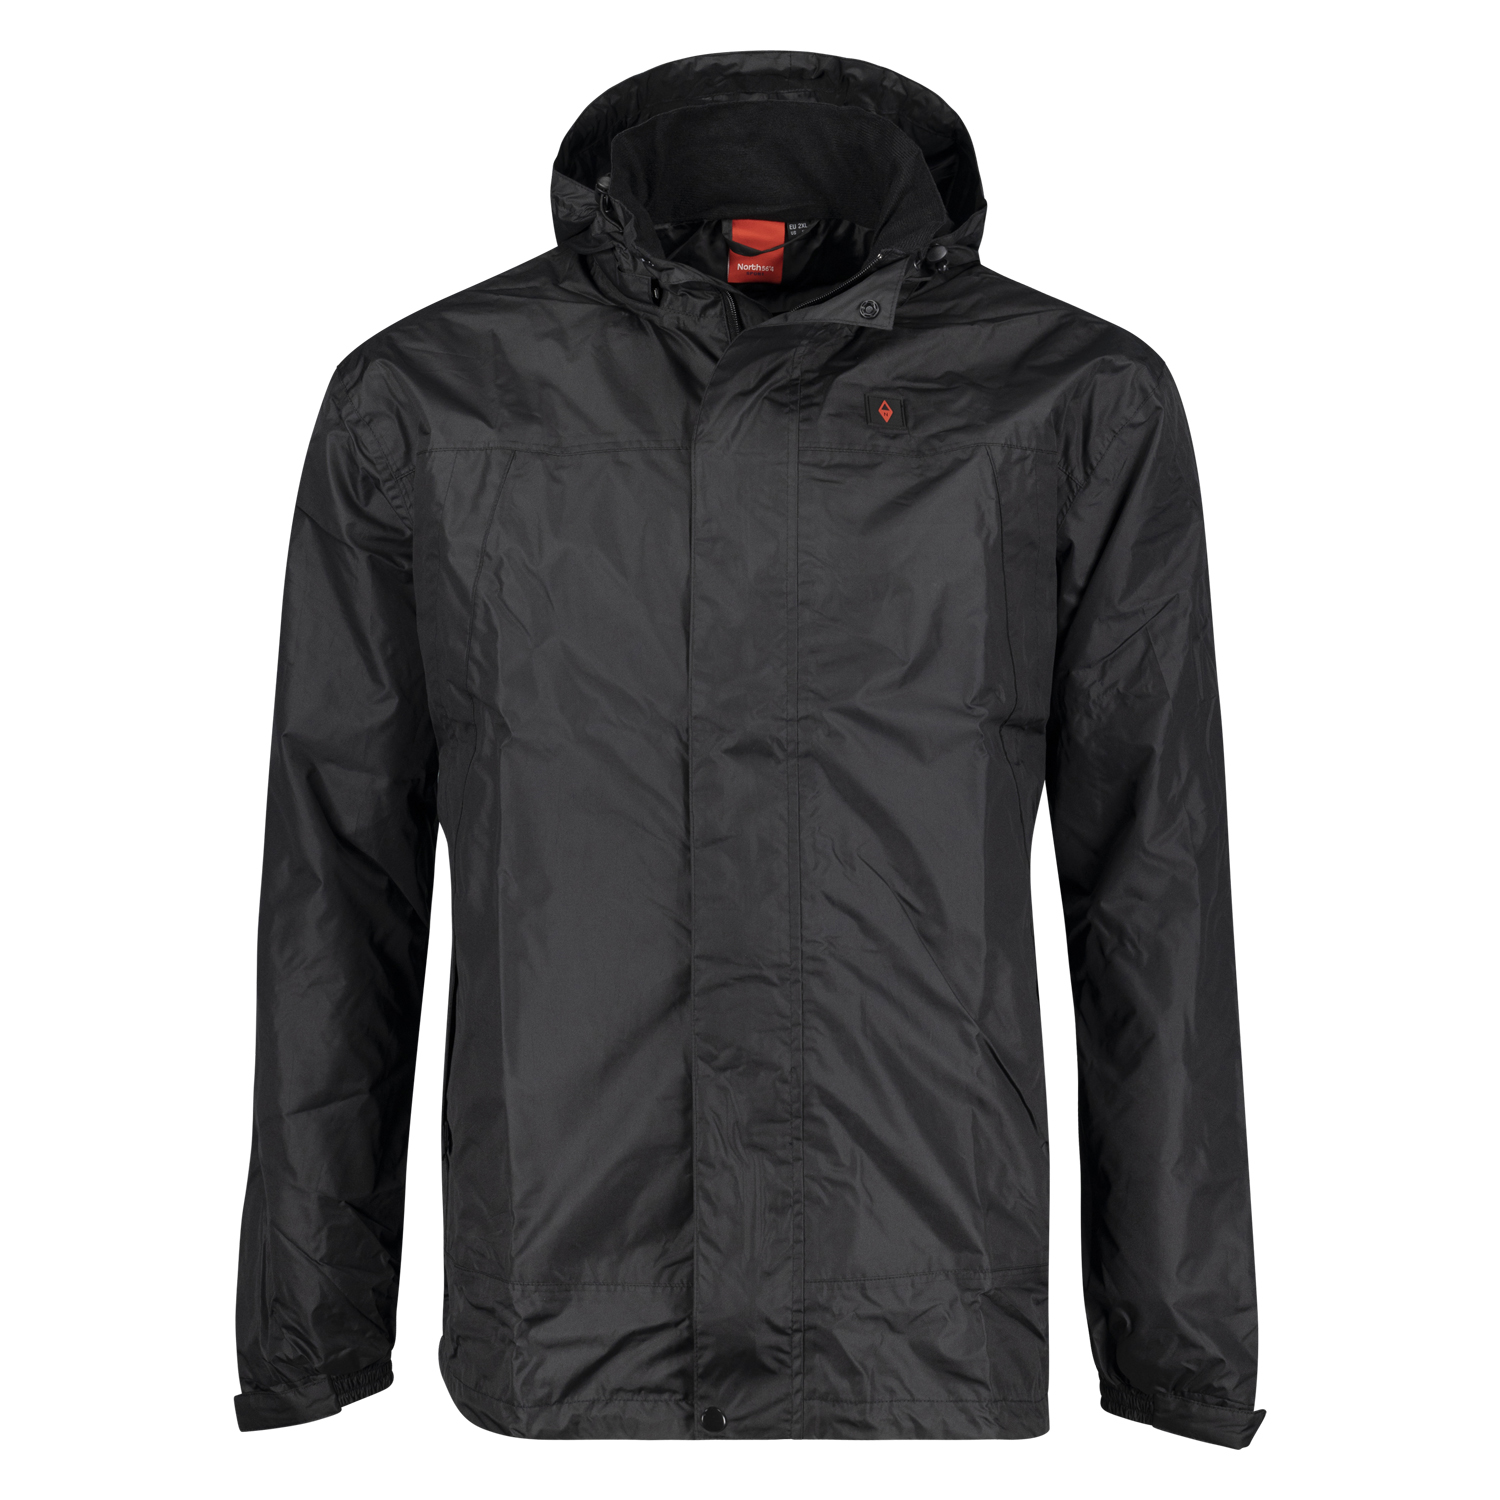 Black rain jacket from Aero in king sizes up to 8 XL